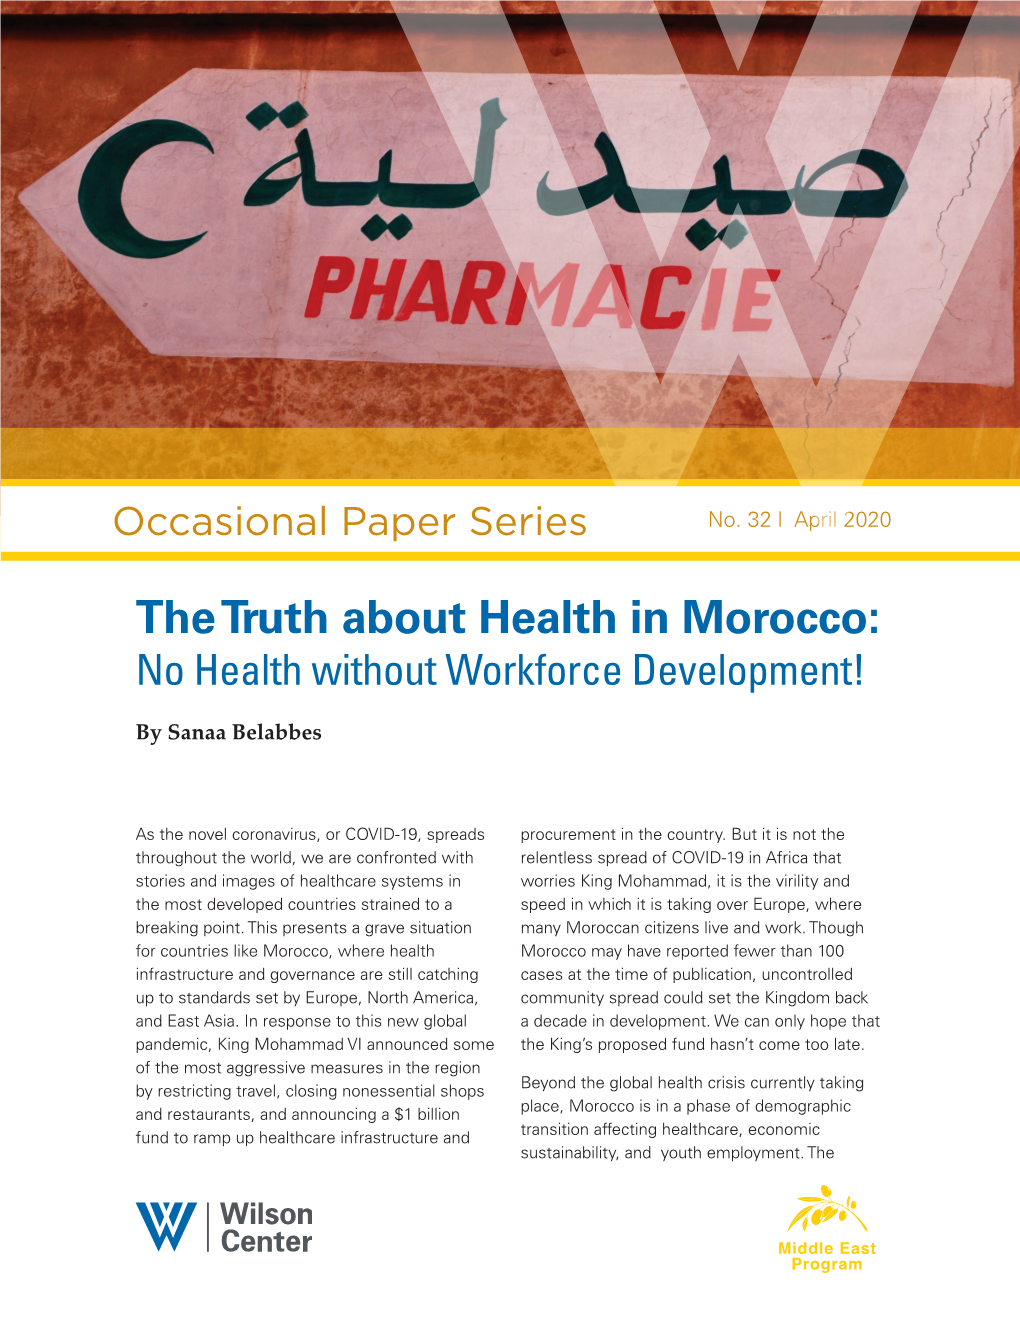 The Truth About Health in Morocco: No Health Without Workforce Development!